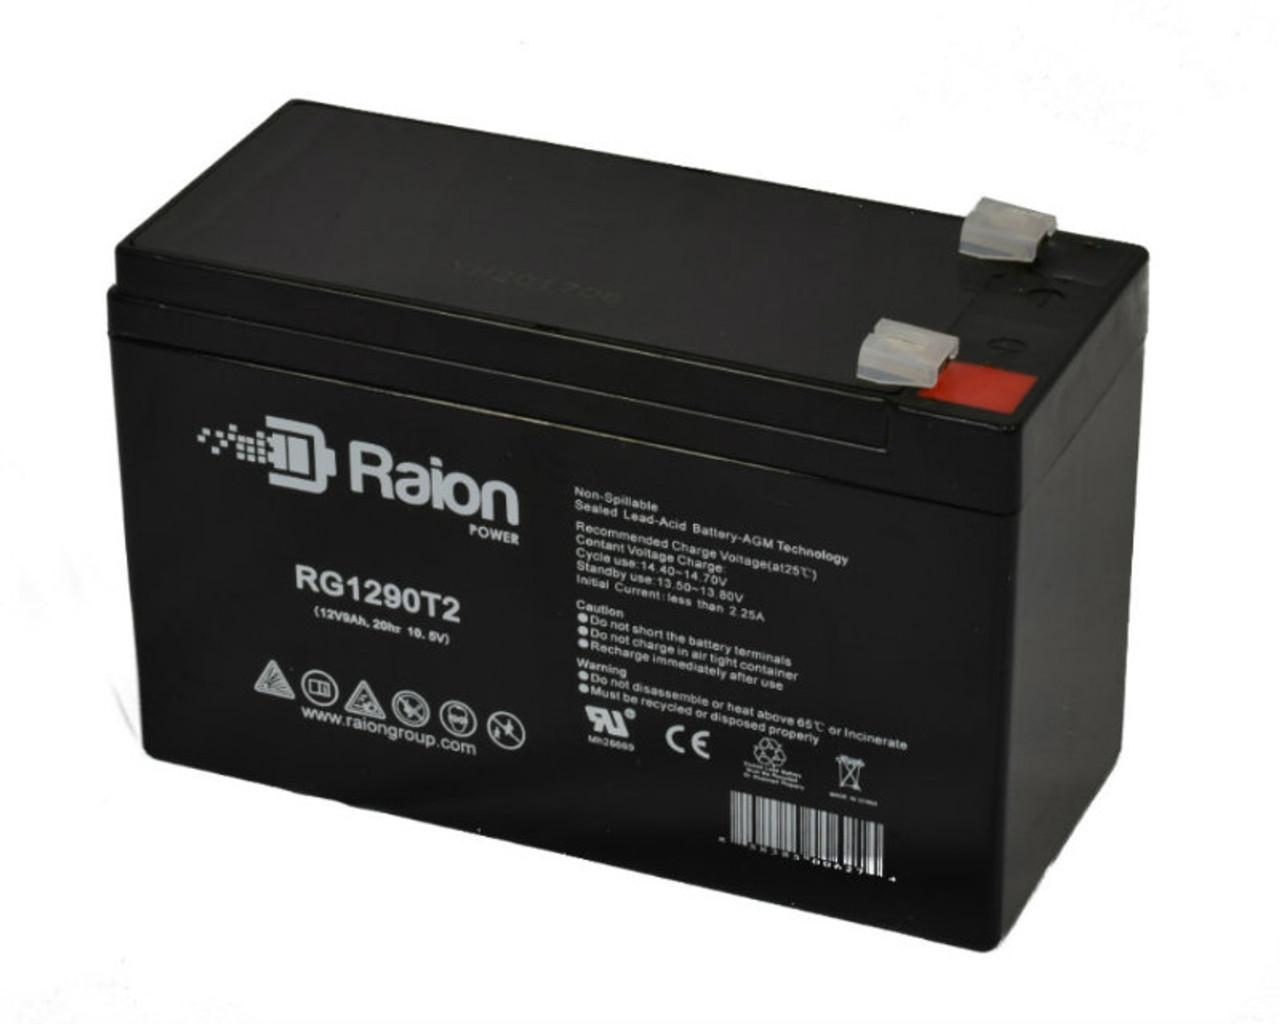 Raion Power RG1290T2 12V 9Ah AGM Battery for Mongoose Fusion Scooter 